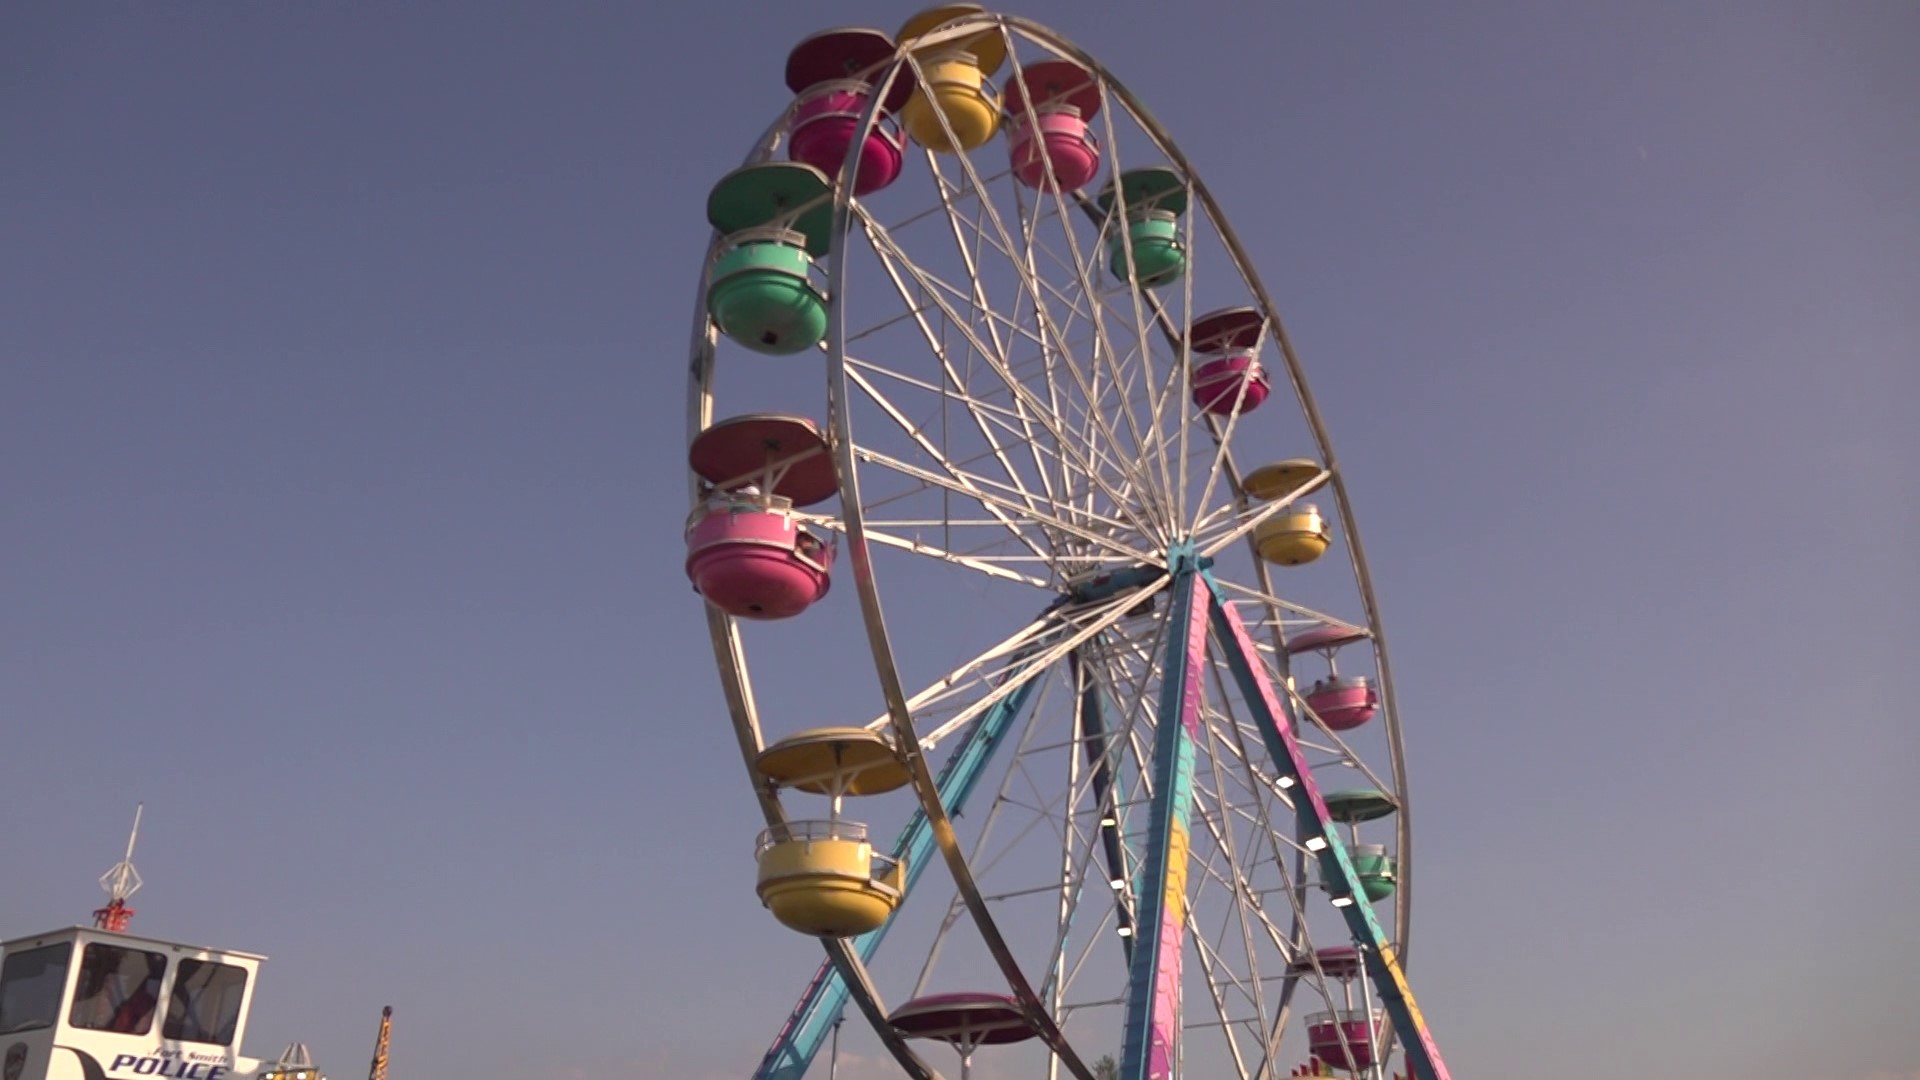 With several heat advisories in place around Washington County, the annual fair is taking steps to make sure everybody stays hydrated.